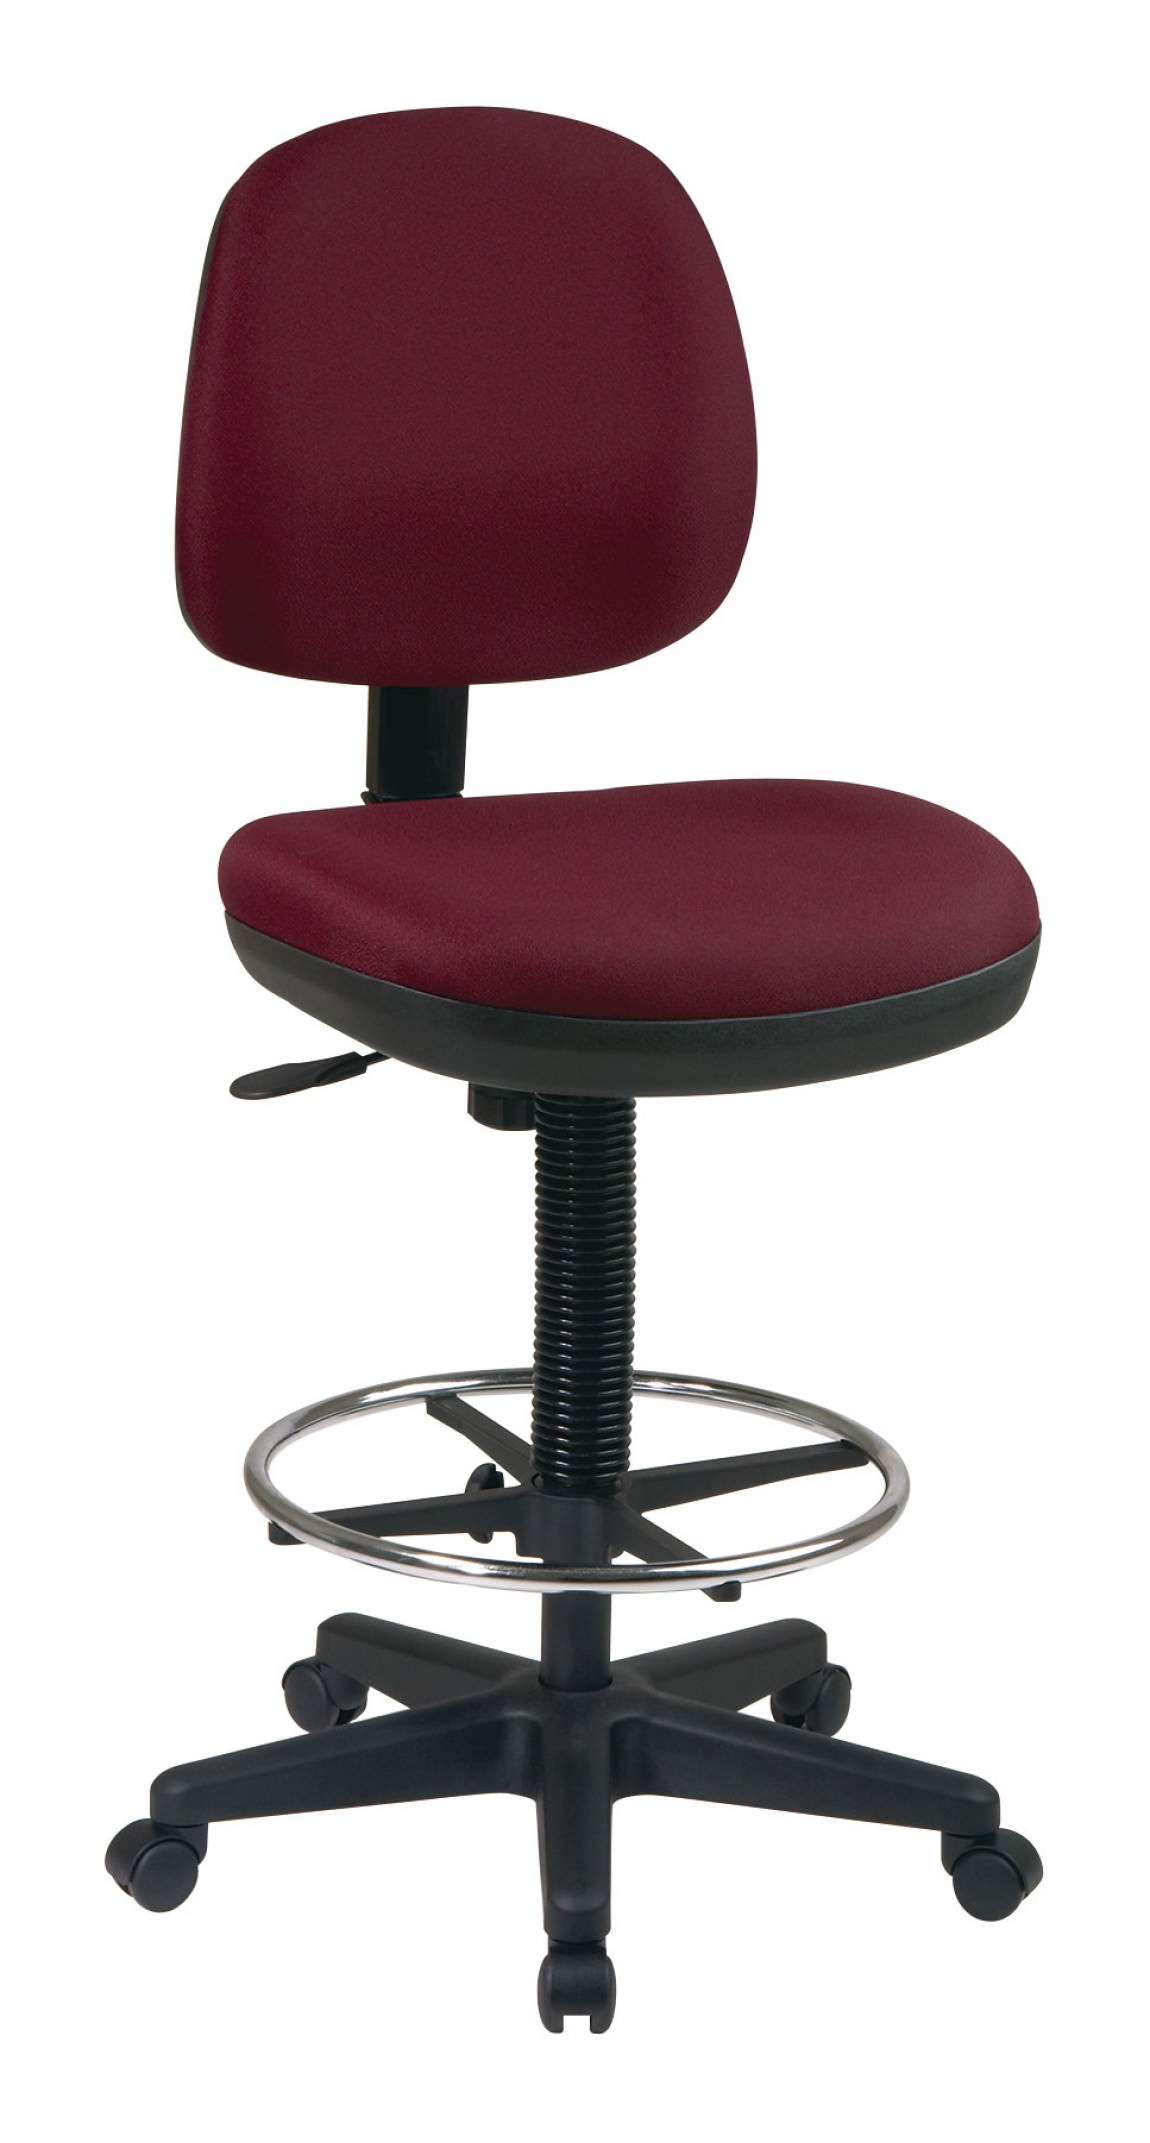 LOWEST PRICES on Office Master Work Stool Collection